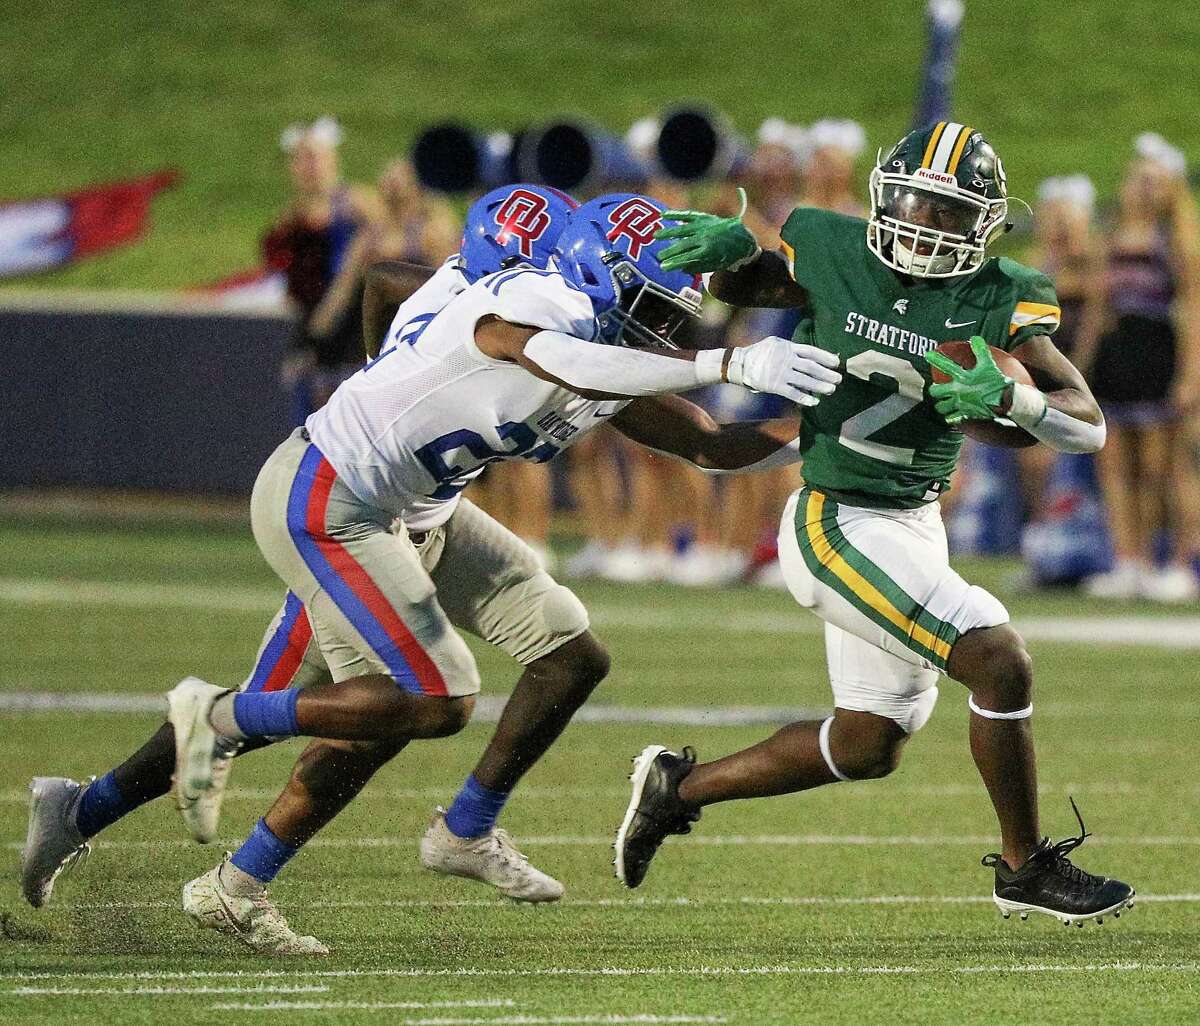 Stratford running back Dallas Payne (2) rushes two Oak Ridge defenders during a high school football game between Oak Ridge and Stratford on September 2, 2022 at Tully Stadium in Houston , Texas. (Photo by Bob Levey/Contributor)